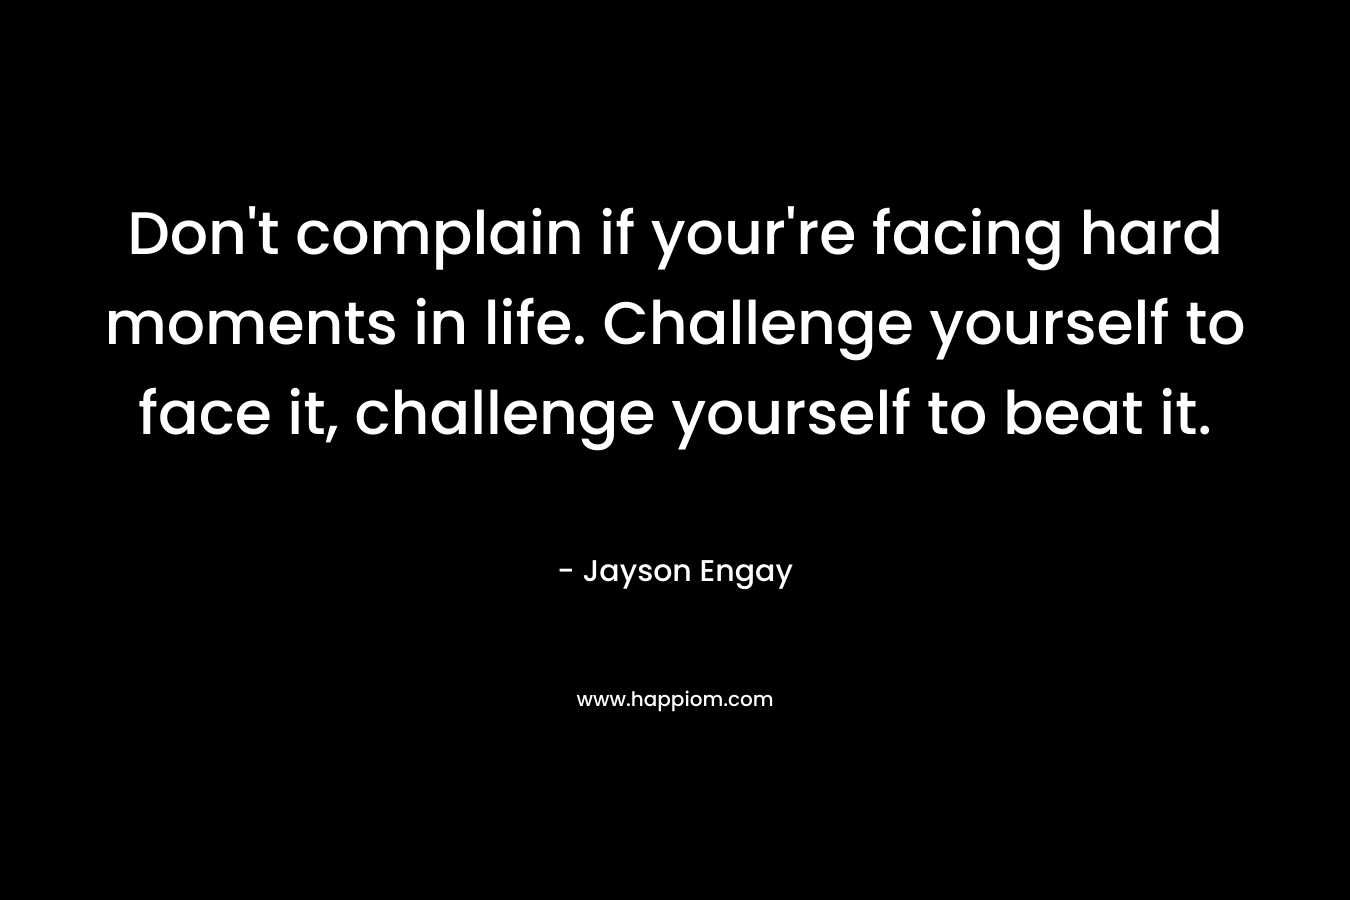 Don't complain if your're facing hard moments in life. Challenge yourself to face it, challenge yourself to beat it.